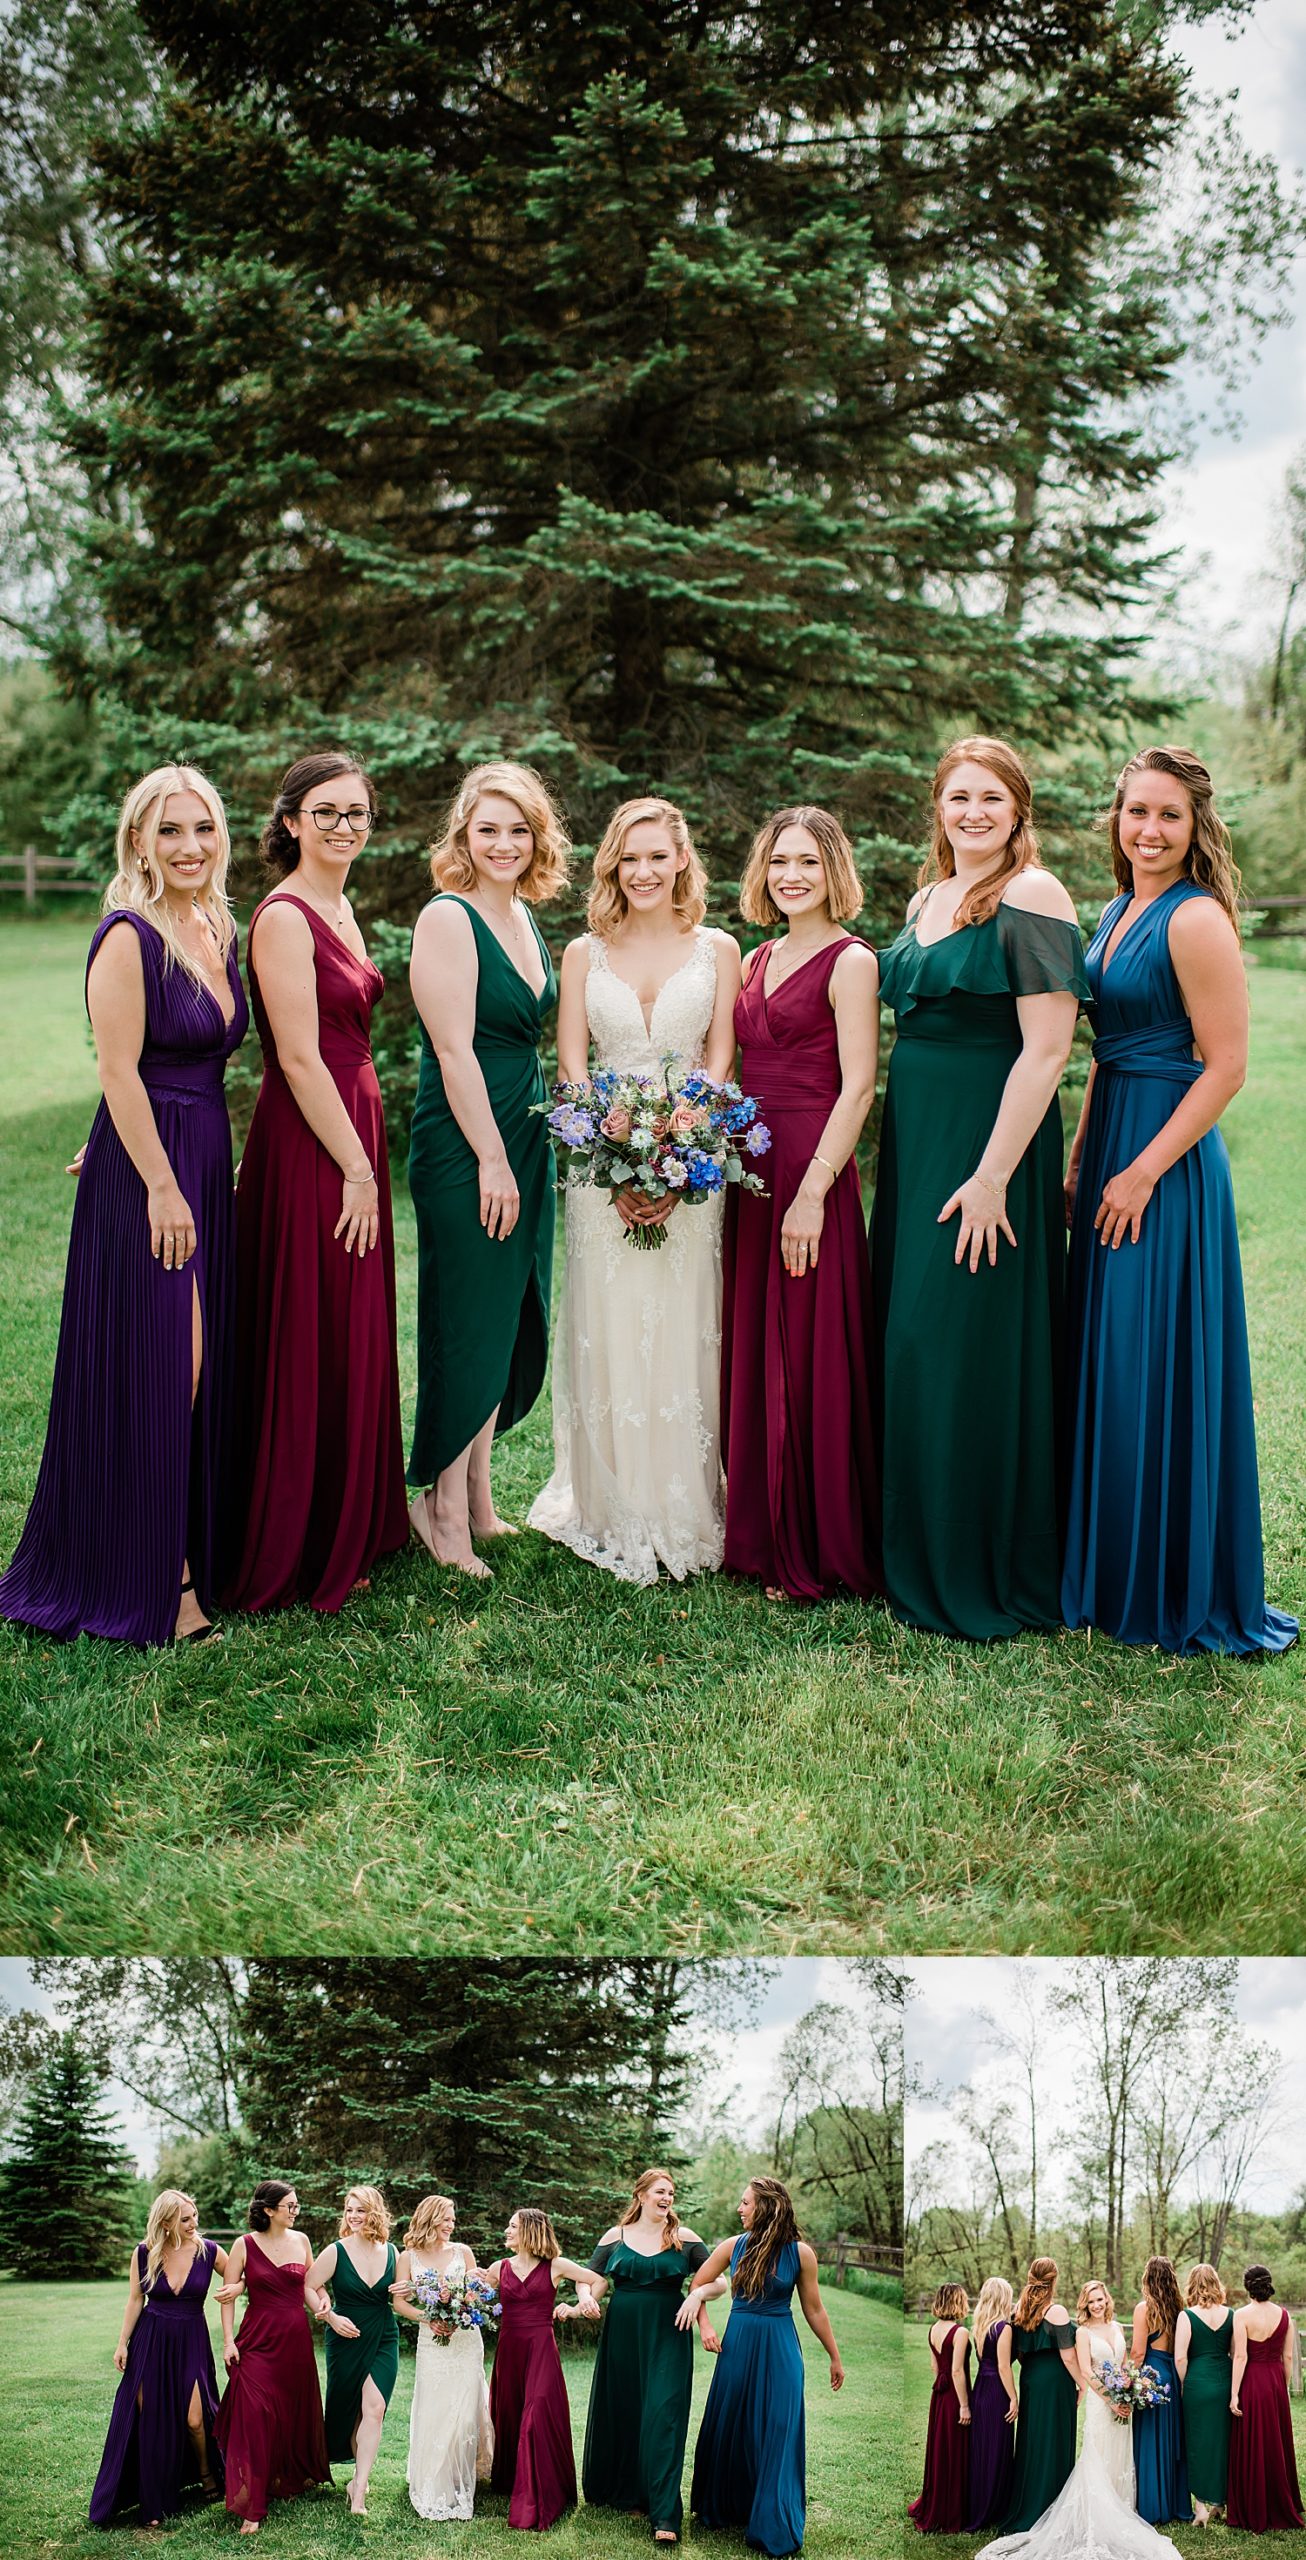 bride and bridesmaids in colorful bridesmaids dresses while holding wedding bouquet 